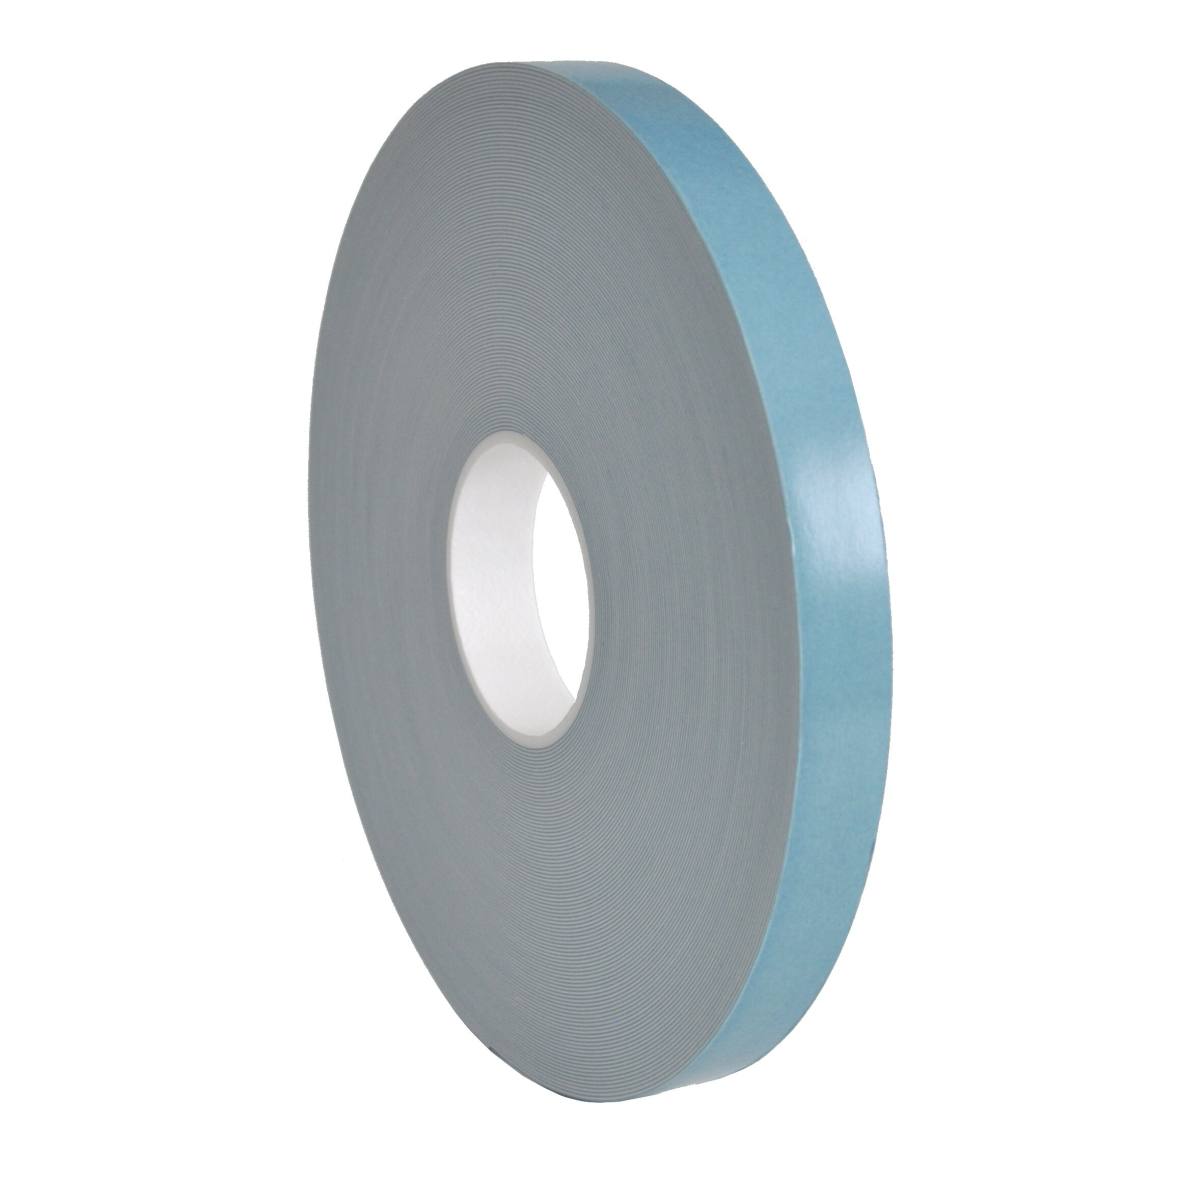 S-K-S 866 Double-sided PE foam adhesive tape with acrylic adhesive, 9 mm x 50 m, 0.8 mm, white